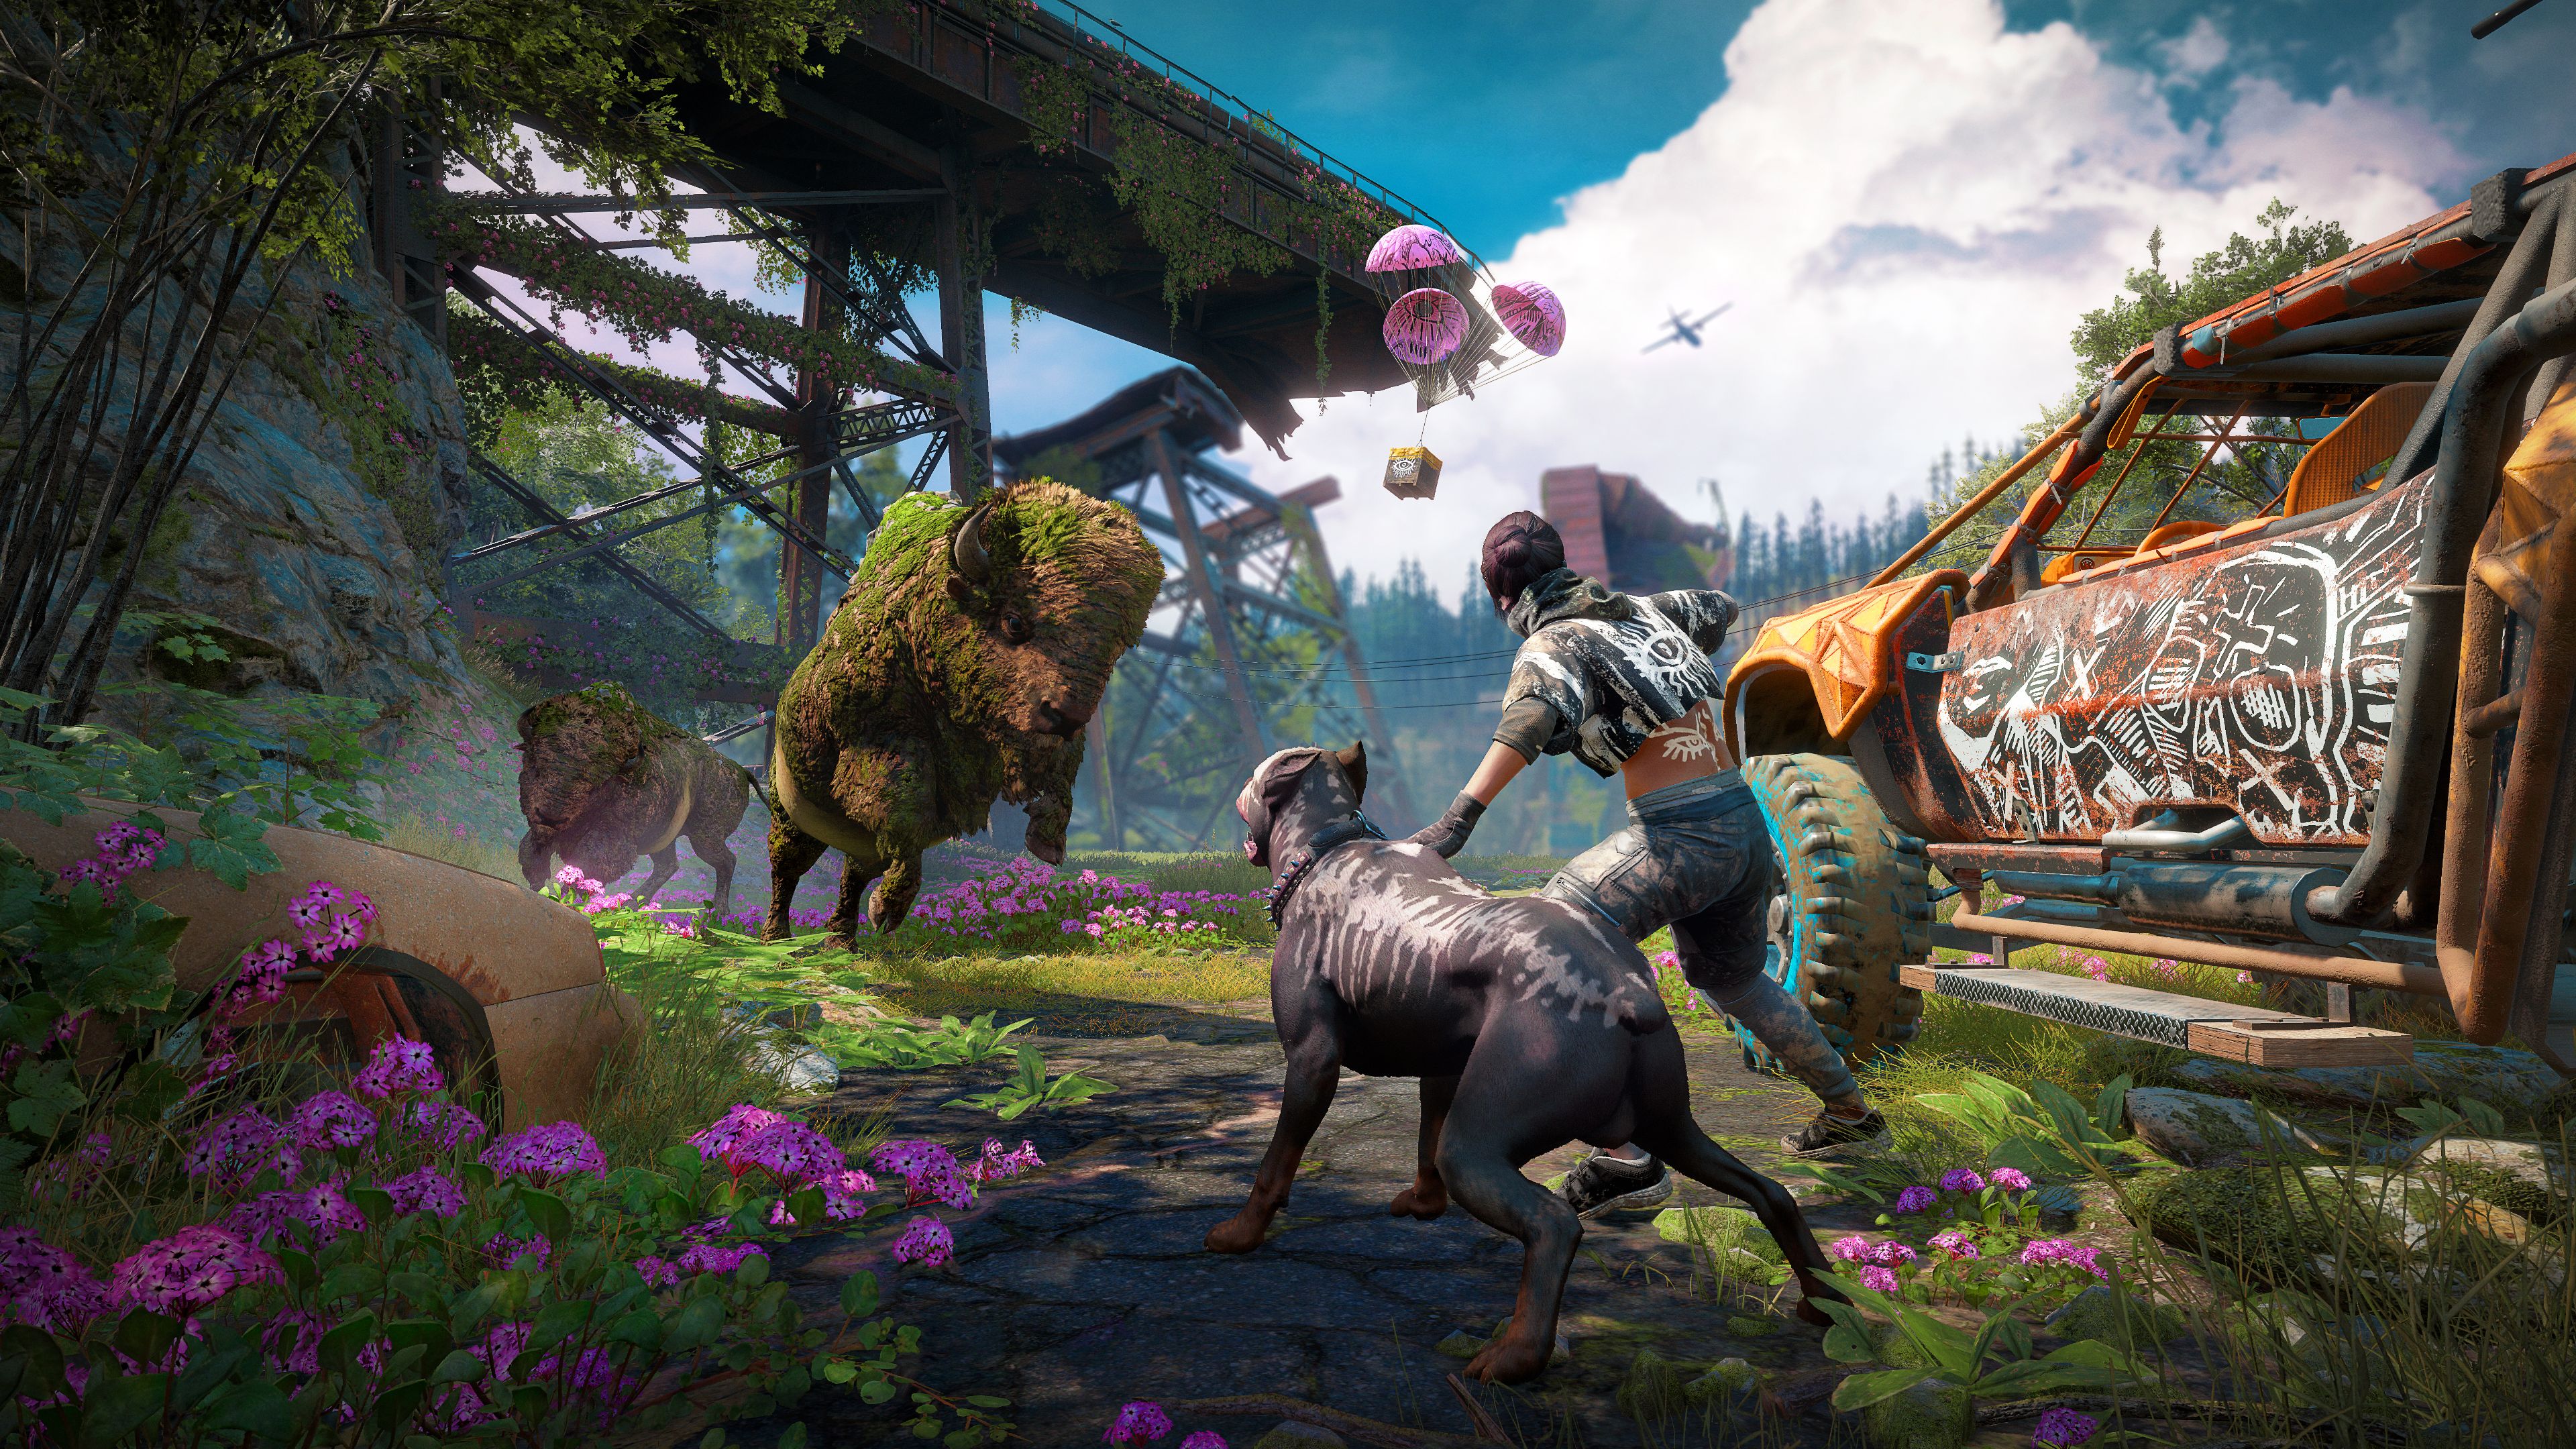 2019 Far Cry New Dawn, HD Games, 4k Wallpapers, Image, Backgrounds